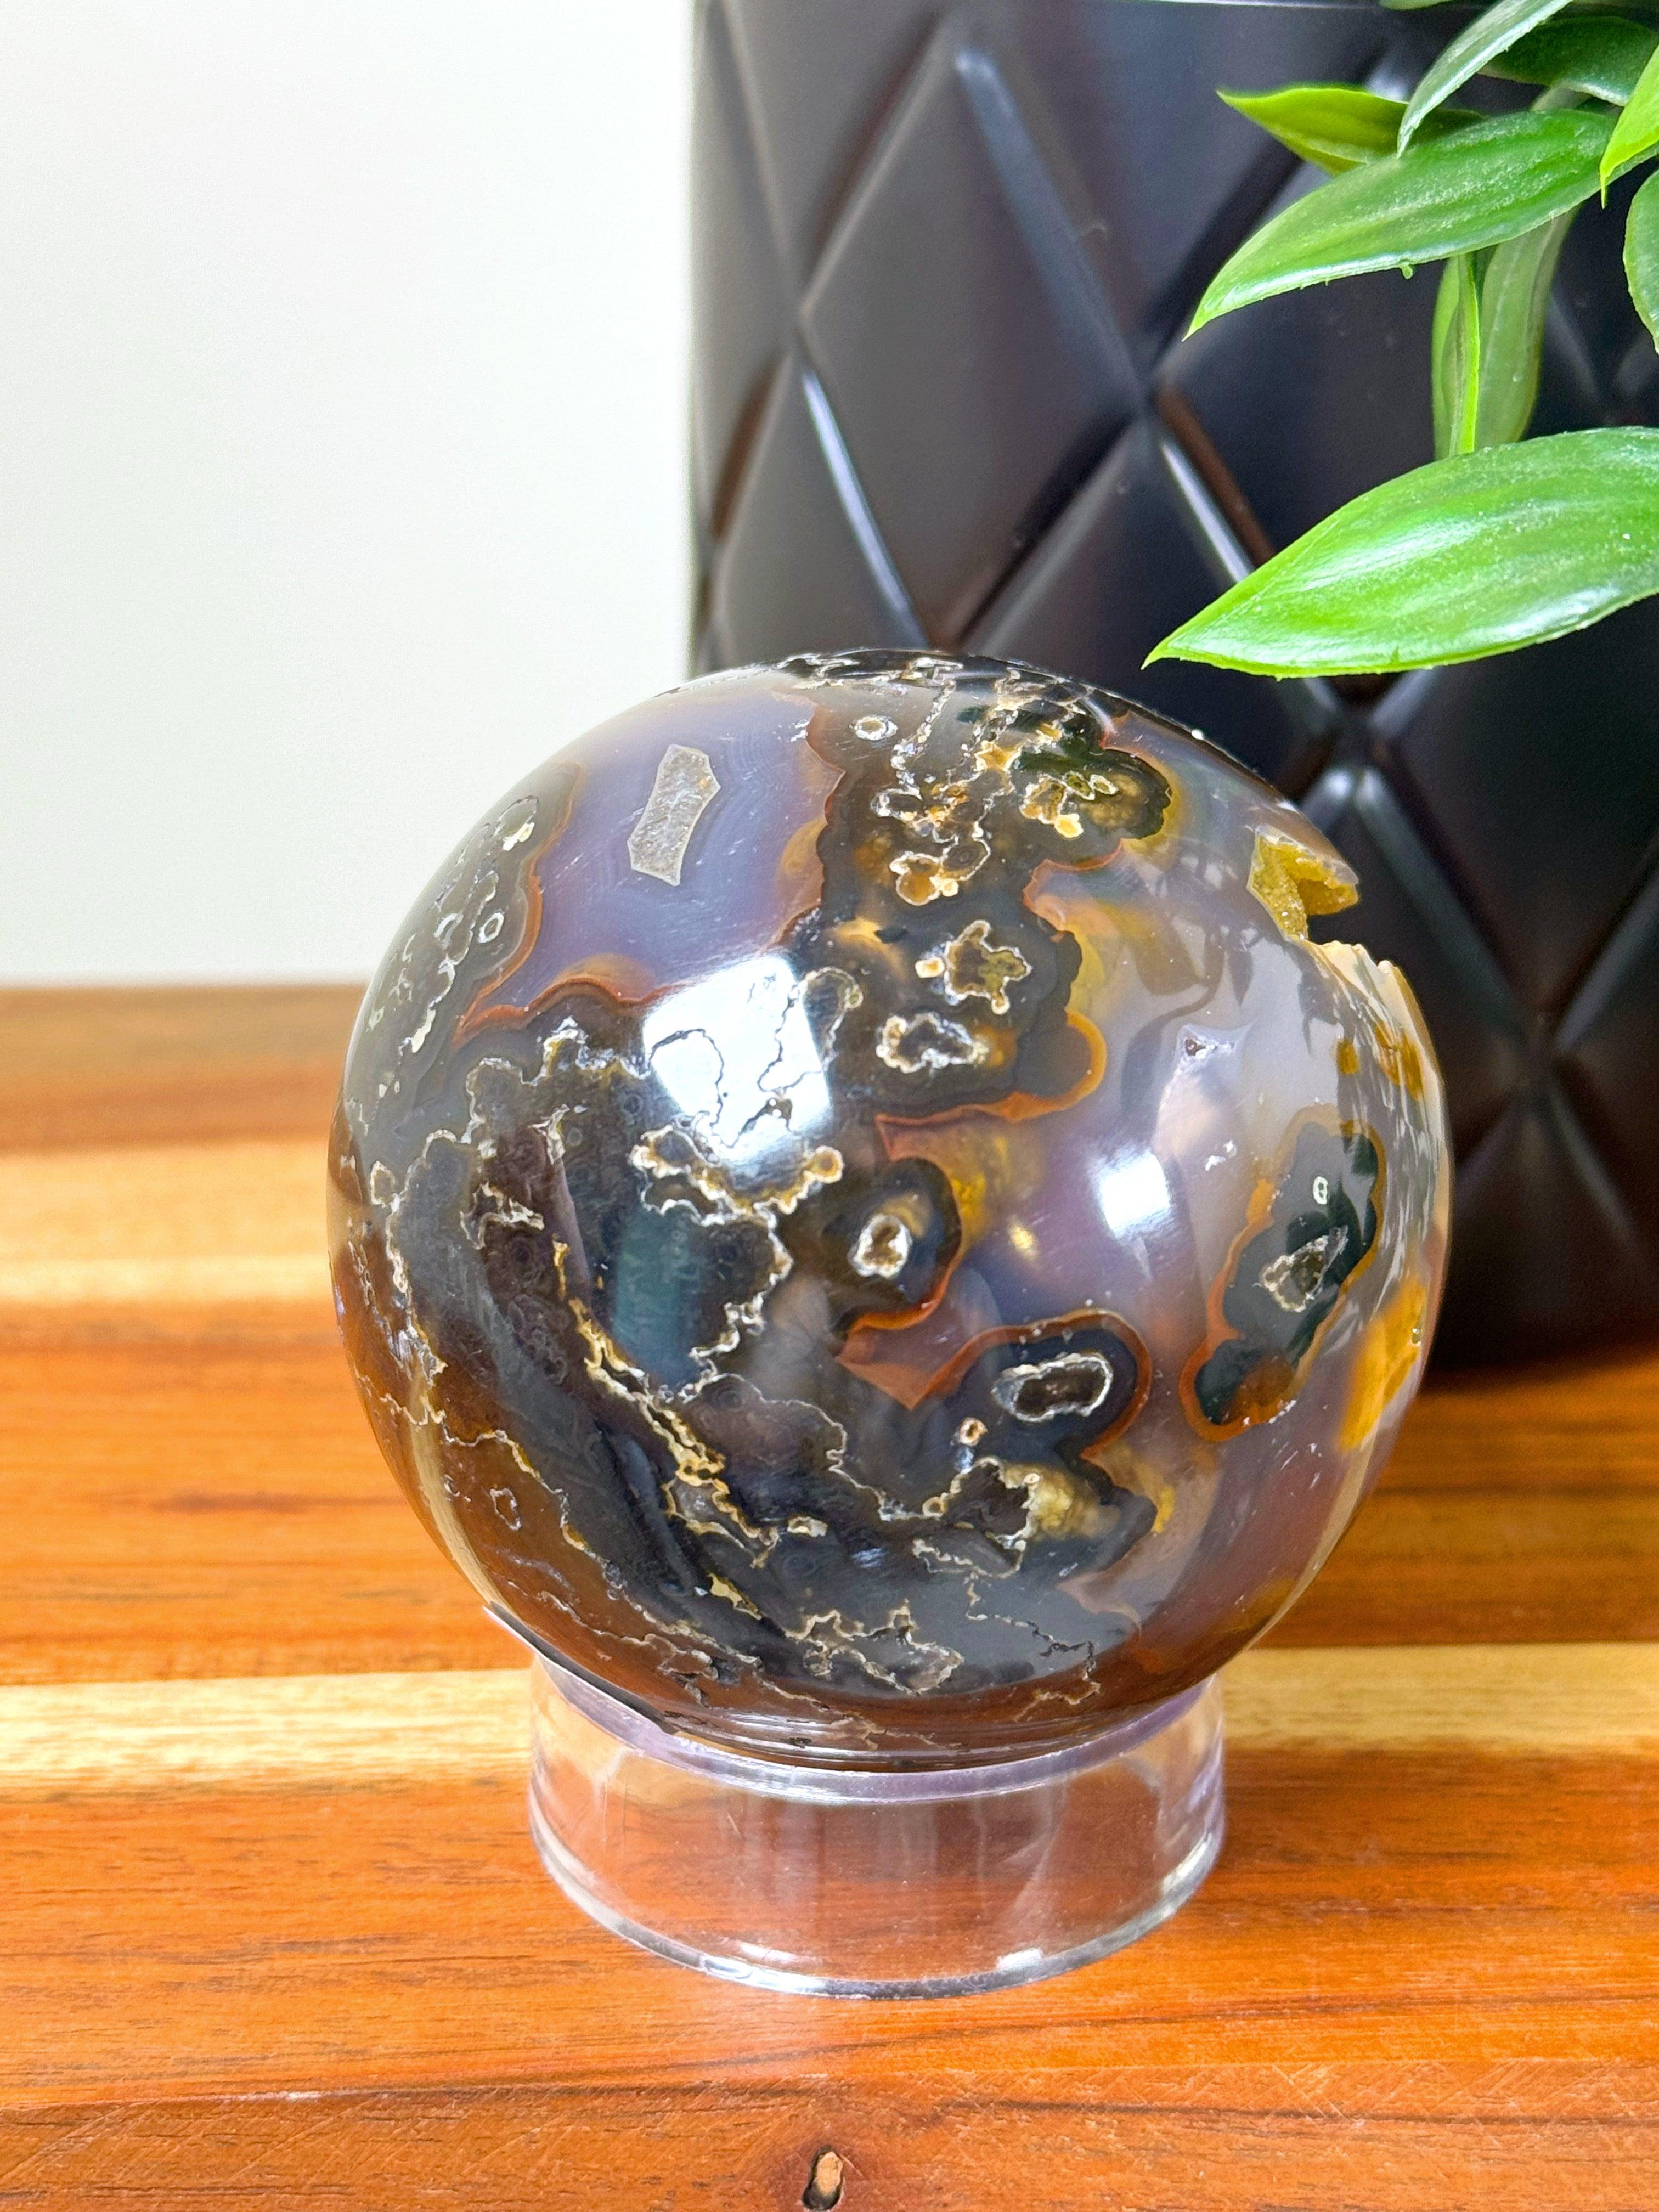 DRUZY AGATE SPHERE 10 - agate, druzy agate, googly agate, googly eye, googly eye agate, one of a kind, sphere, statement piece - The Mineral Maven